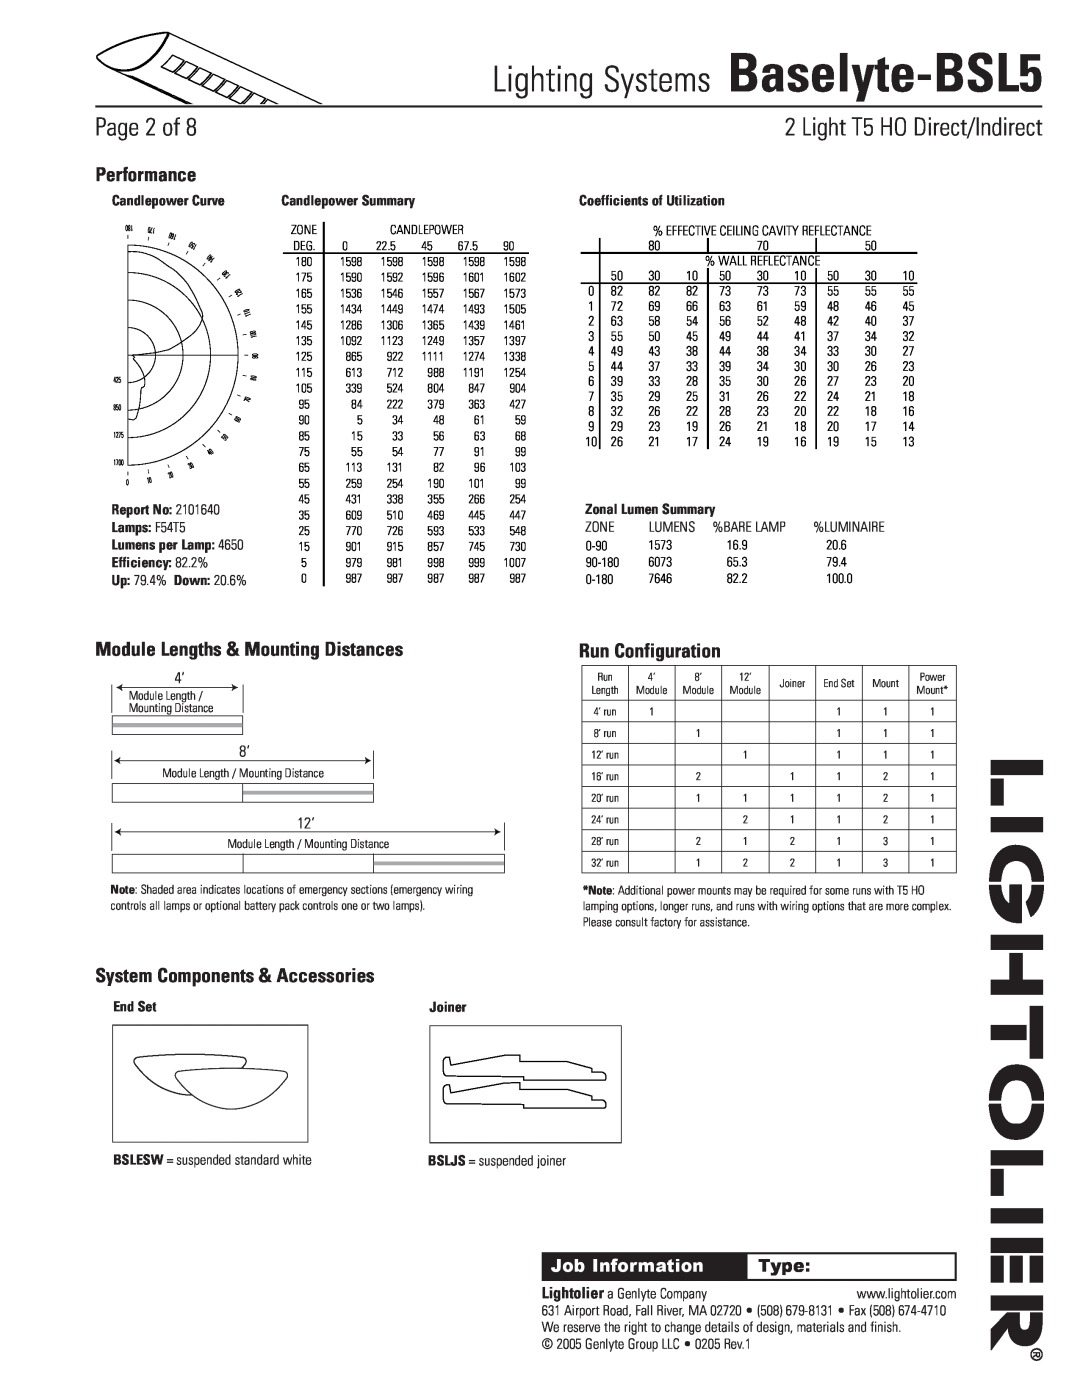 Lightolier Lighting Systems Baselyte-BSL5, Page of, Performance, Module Lengths & Mounting Distances, Run Configuration 